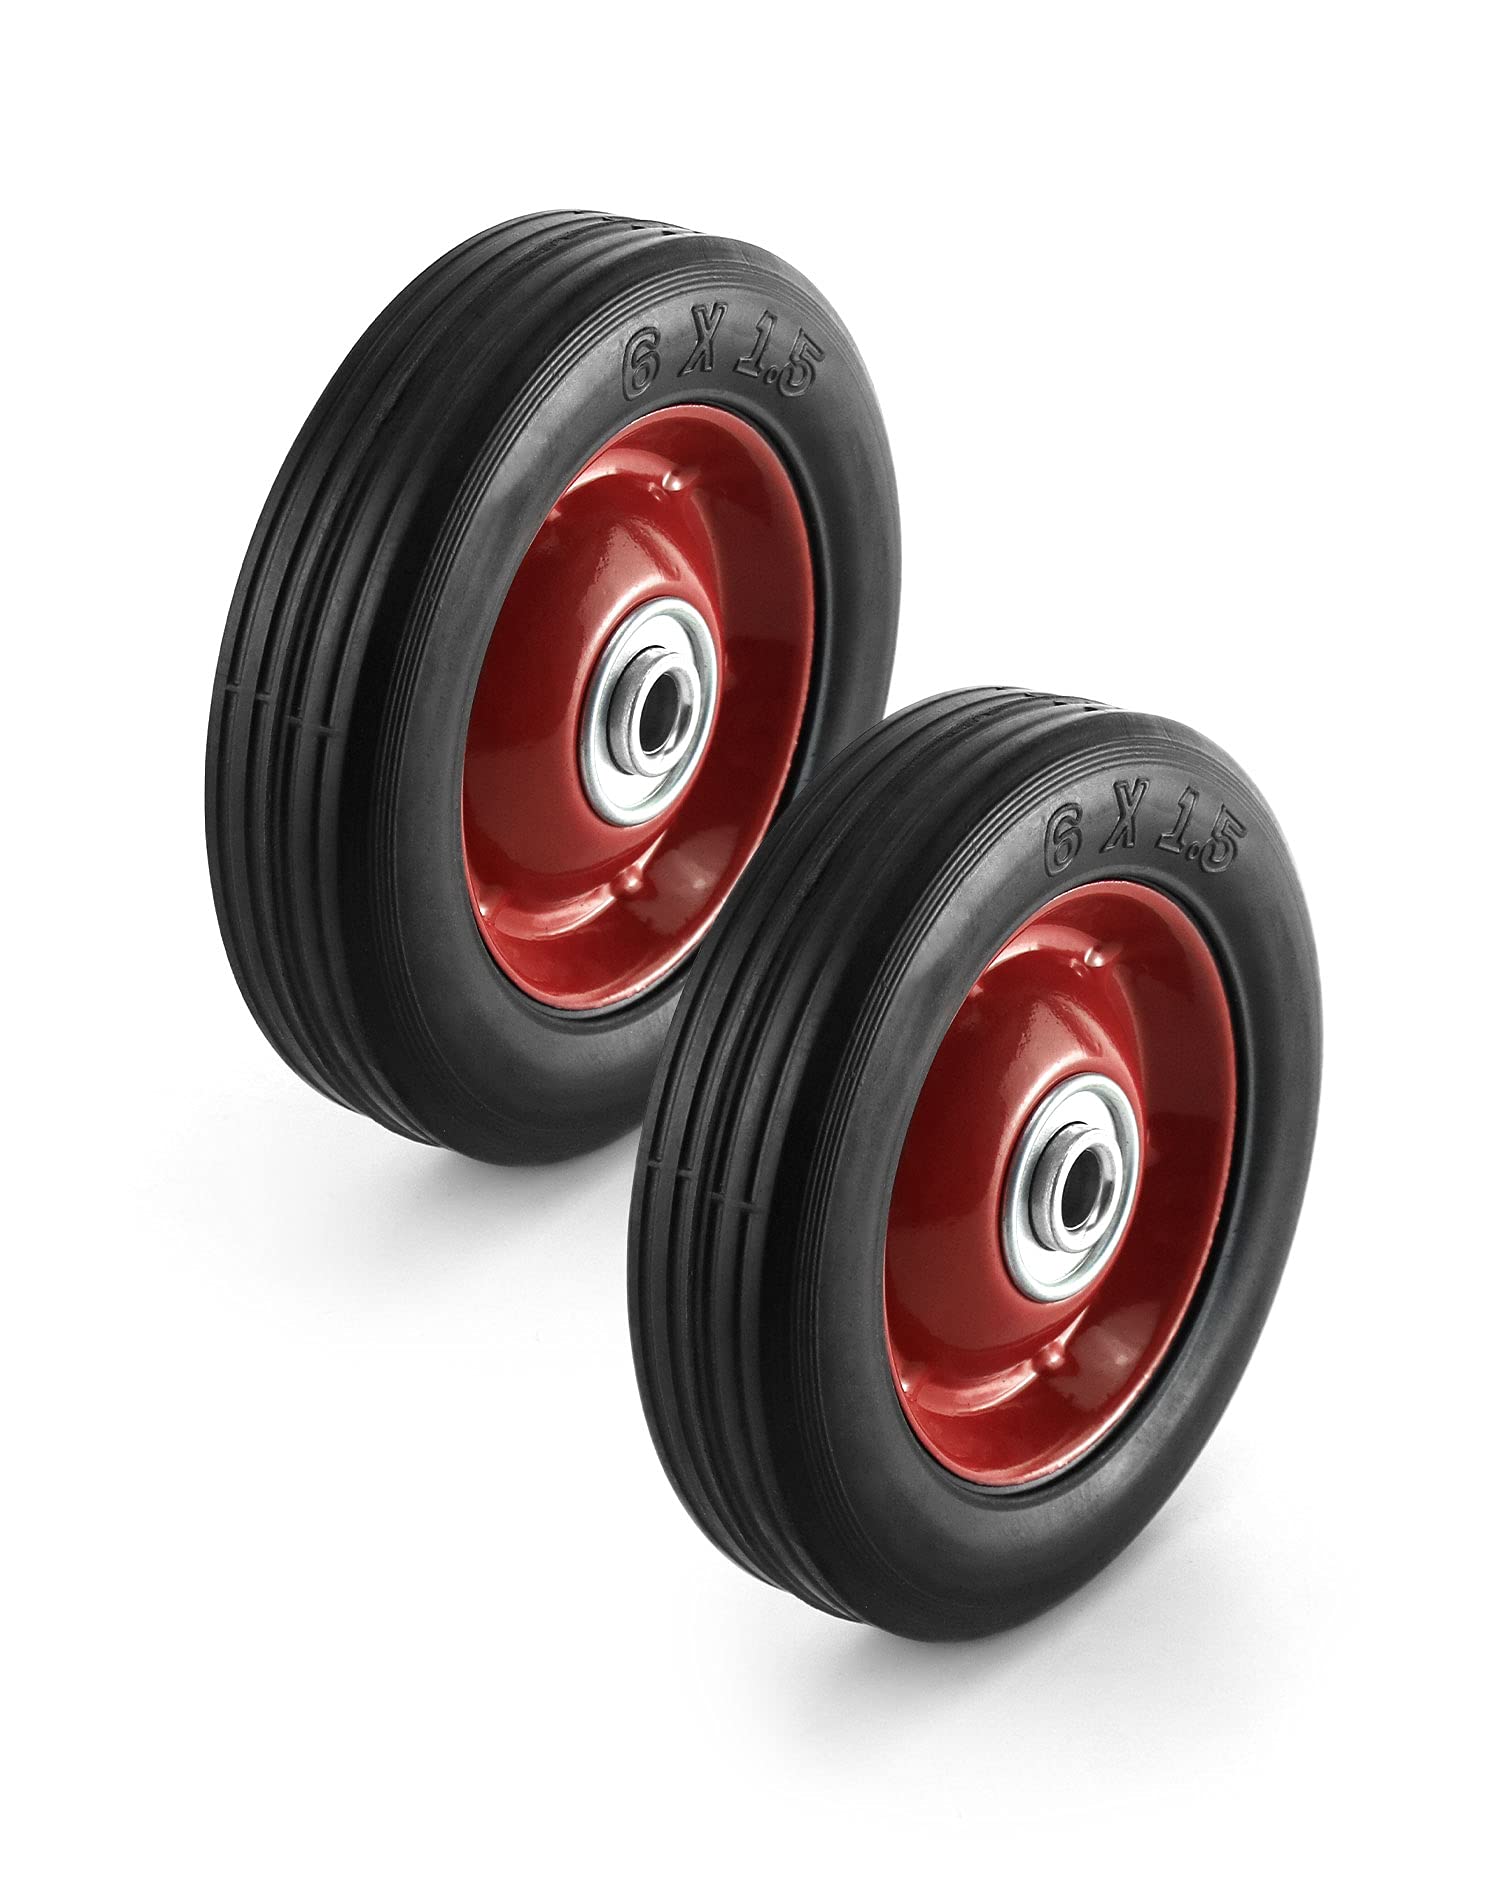 QWORK 2 Pack 6" x 1.5",1/2" Axle, Premium Rubber Wheel with Ball Bearing, Hand Truck Wheel, Capacity up to 132 lbs